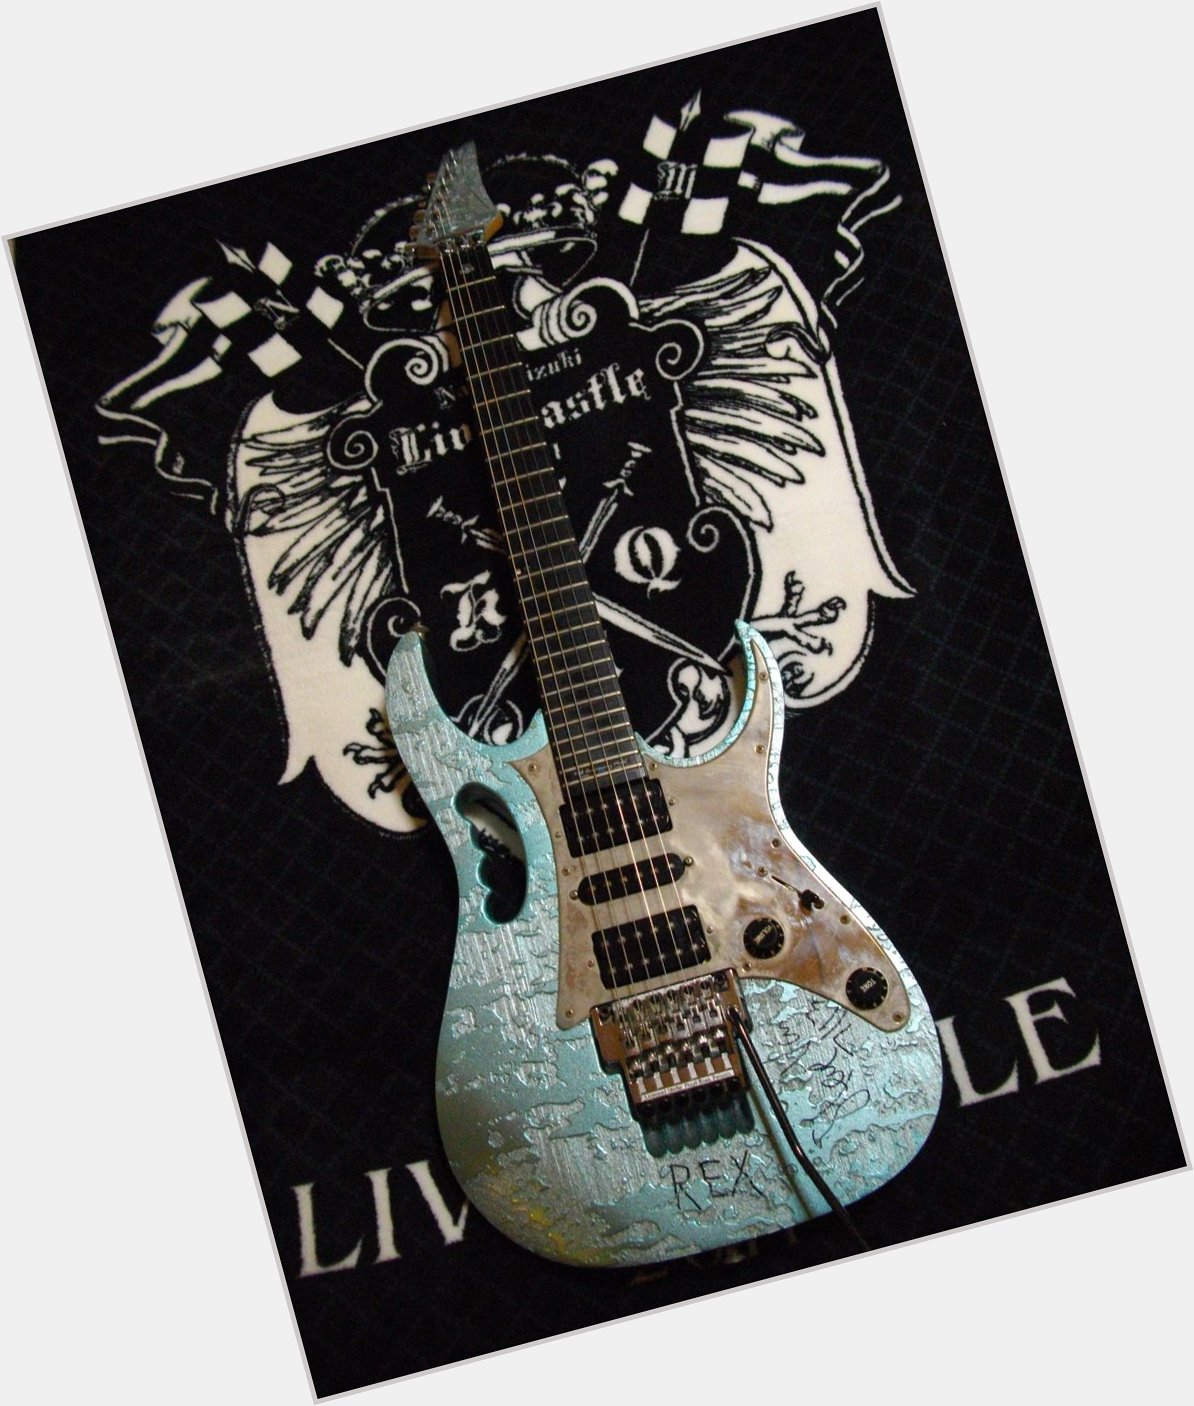  Happy birthday Mr.Steve Vai!
I\m proud of playing the JEM named and autographed by you.
Thank you. 